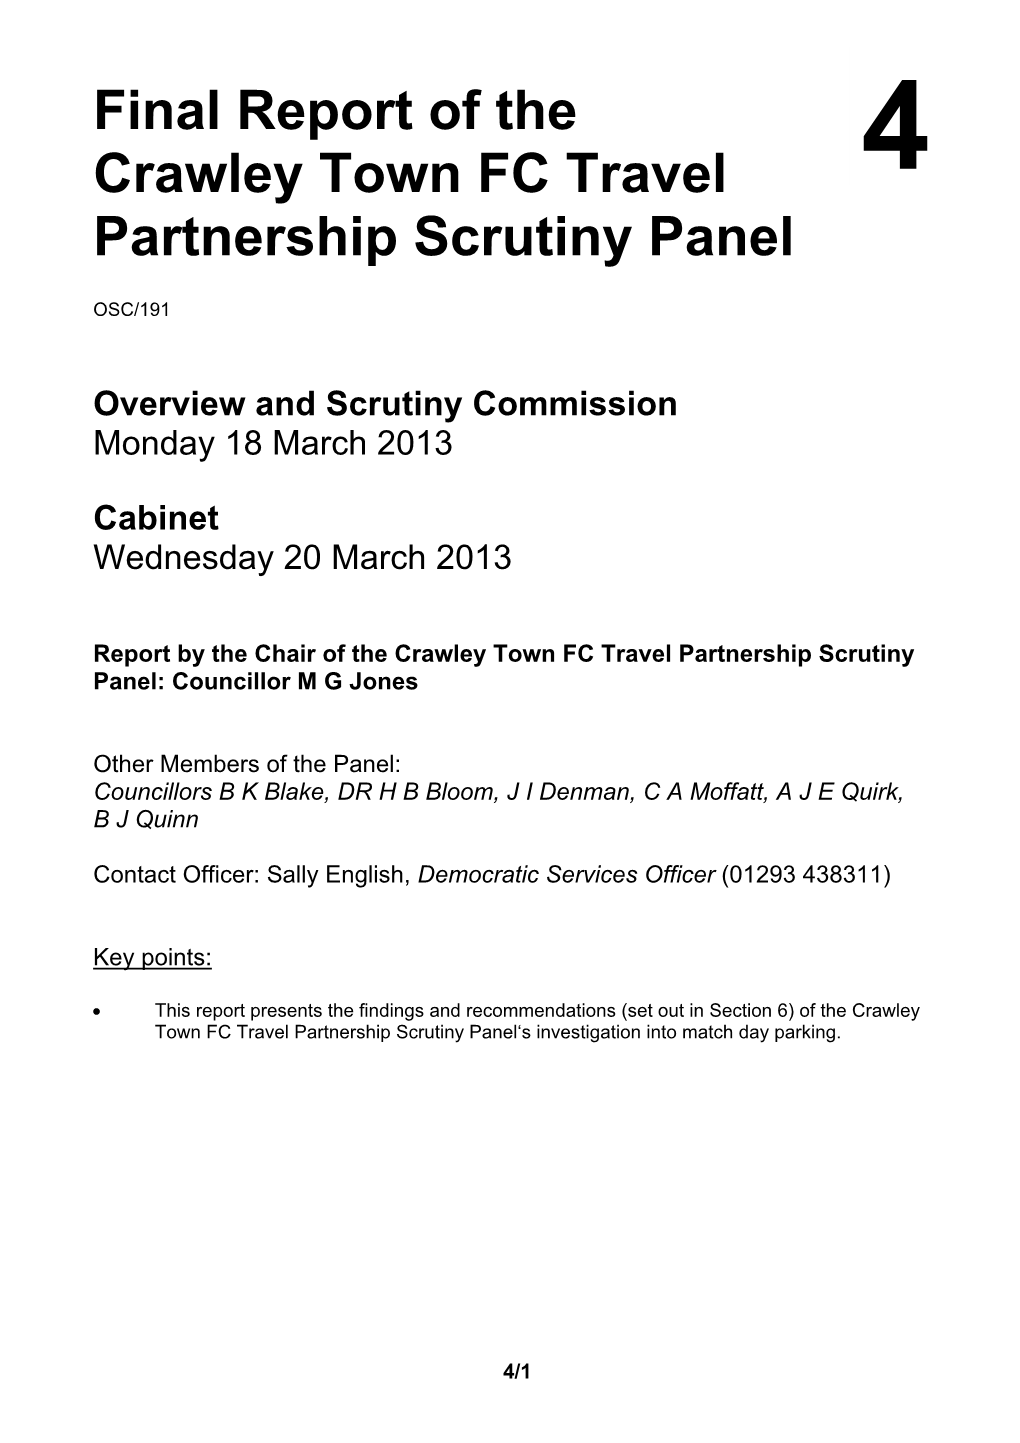 Final Report of the Crawley Town FC Travel Partnership Scrutiny Panel